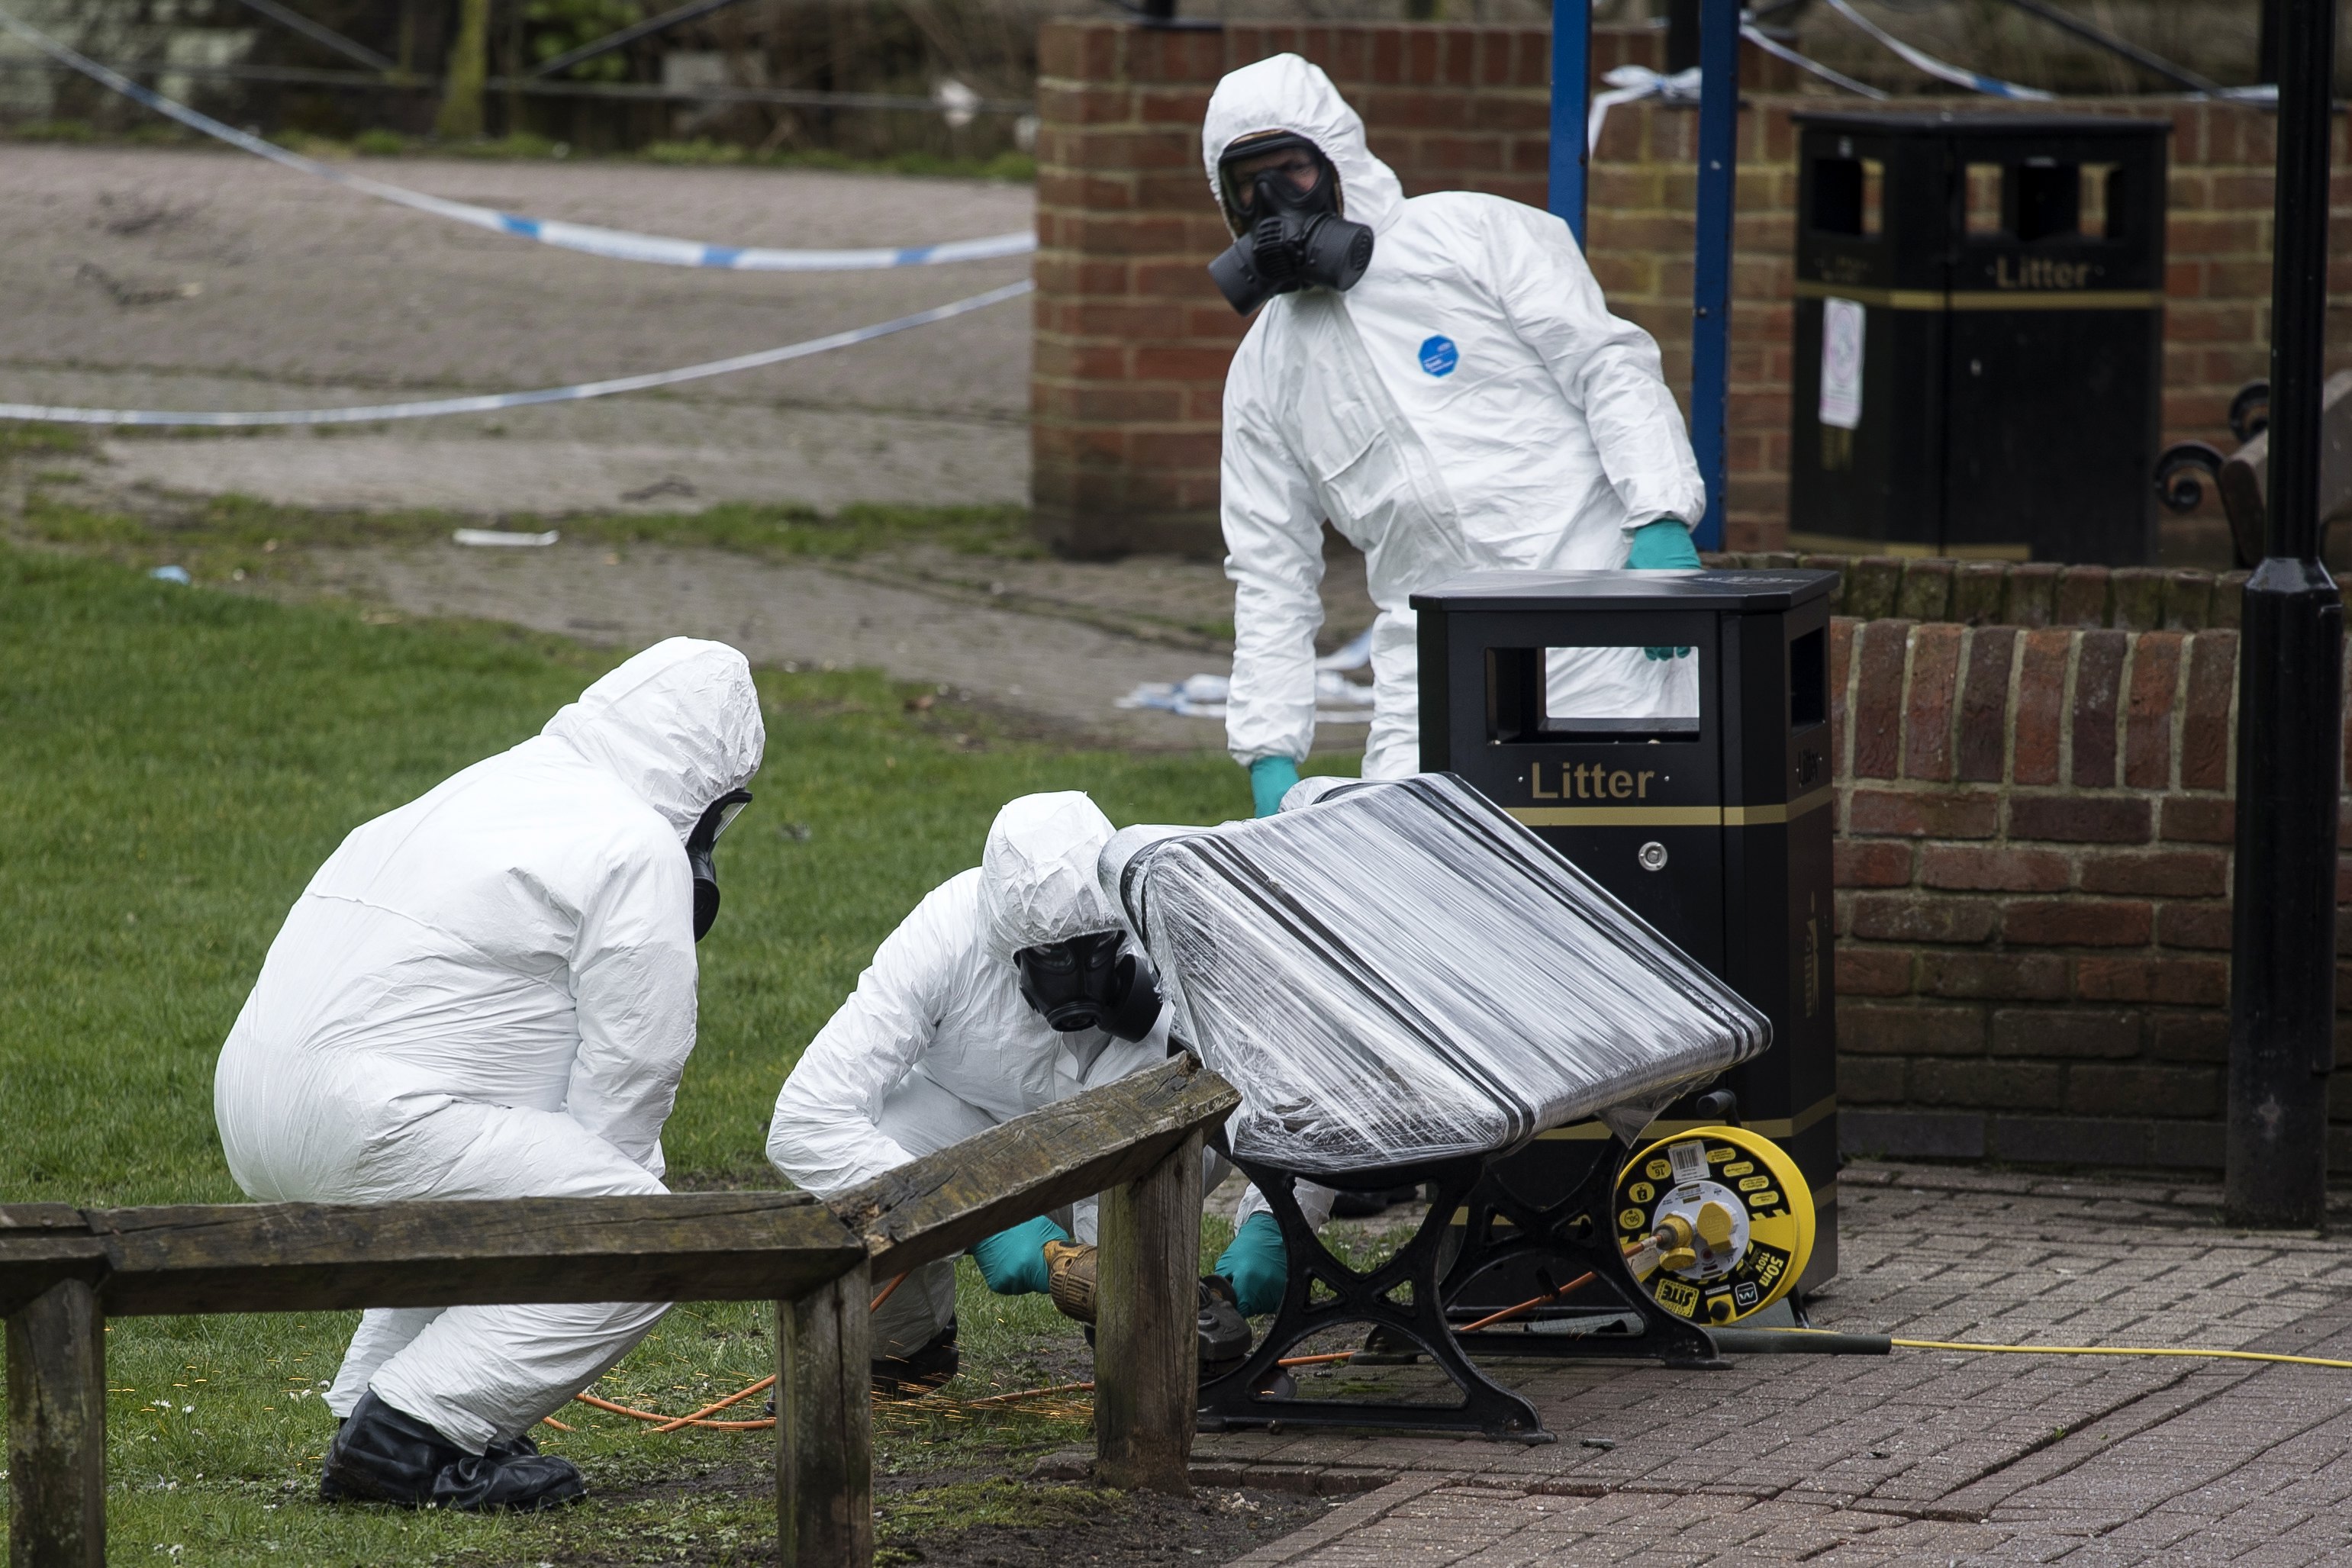 2018-03-23 14:57:29 epa06623861 Army officers remove the bench, where Sergei Skripal and his daughter were found, in Salisbury, Wiltshire, Britain, 23 March 2018. Former Russian spy Sergei Skripal, who lived in Salisbury and his daughter Yulia were found suffering from extreme exposure to a rare nerve agent in Salisbury on 04 March 2018. Skripal and his daughter Yulia remain in a 'very serious' condition. EPA/WILL OLIVER